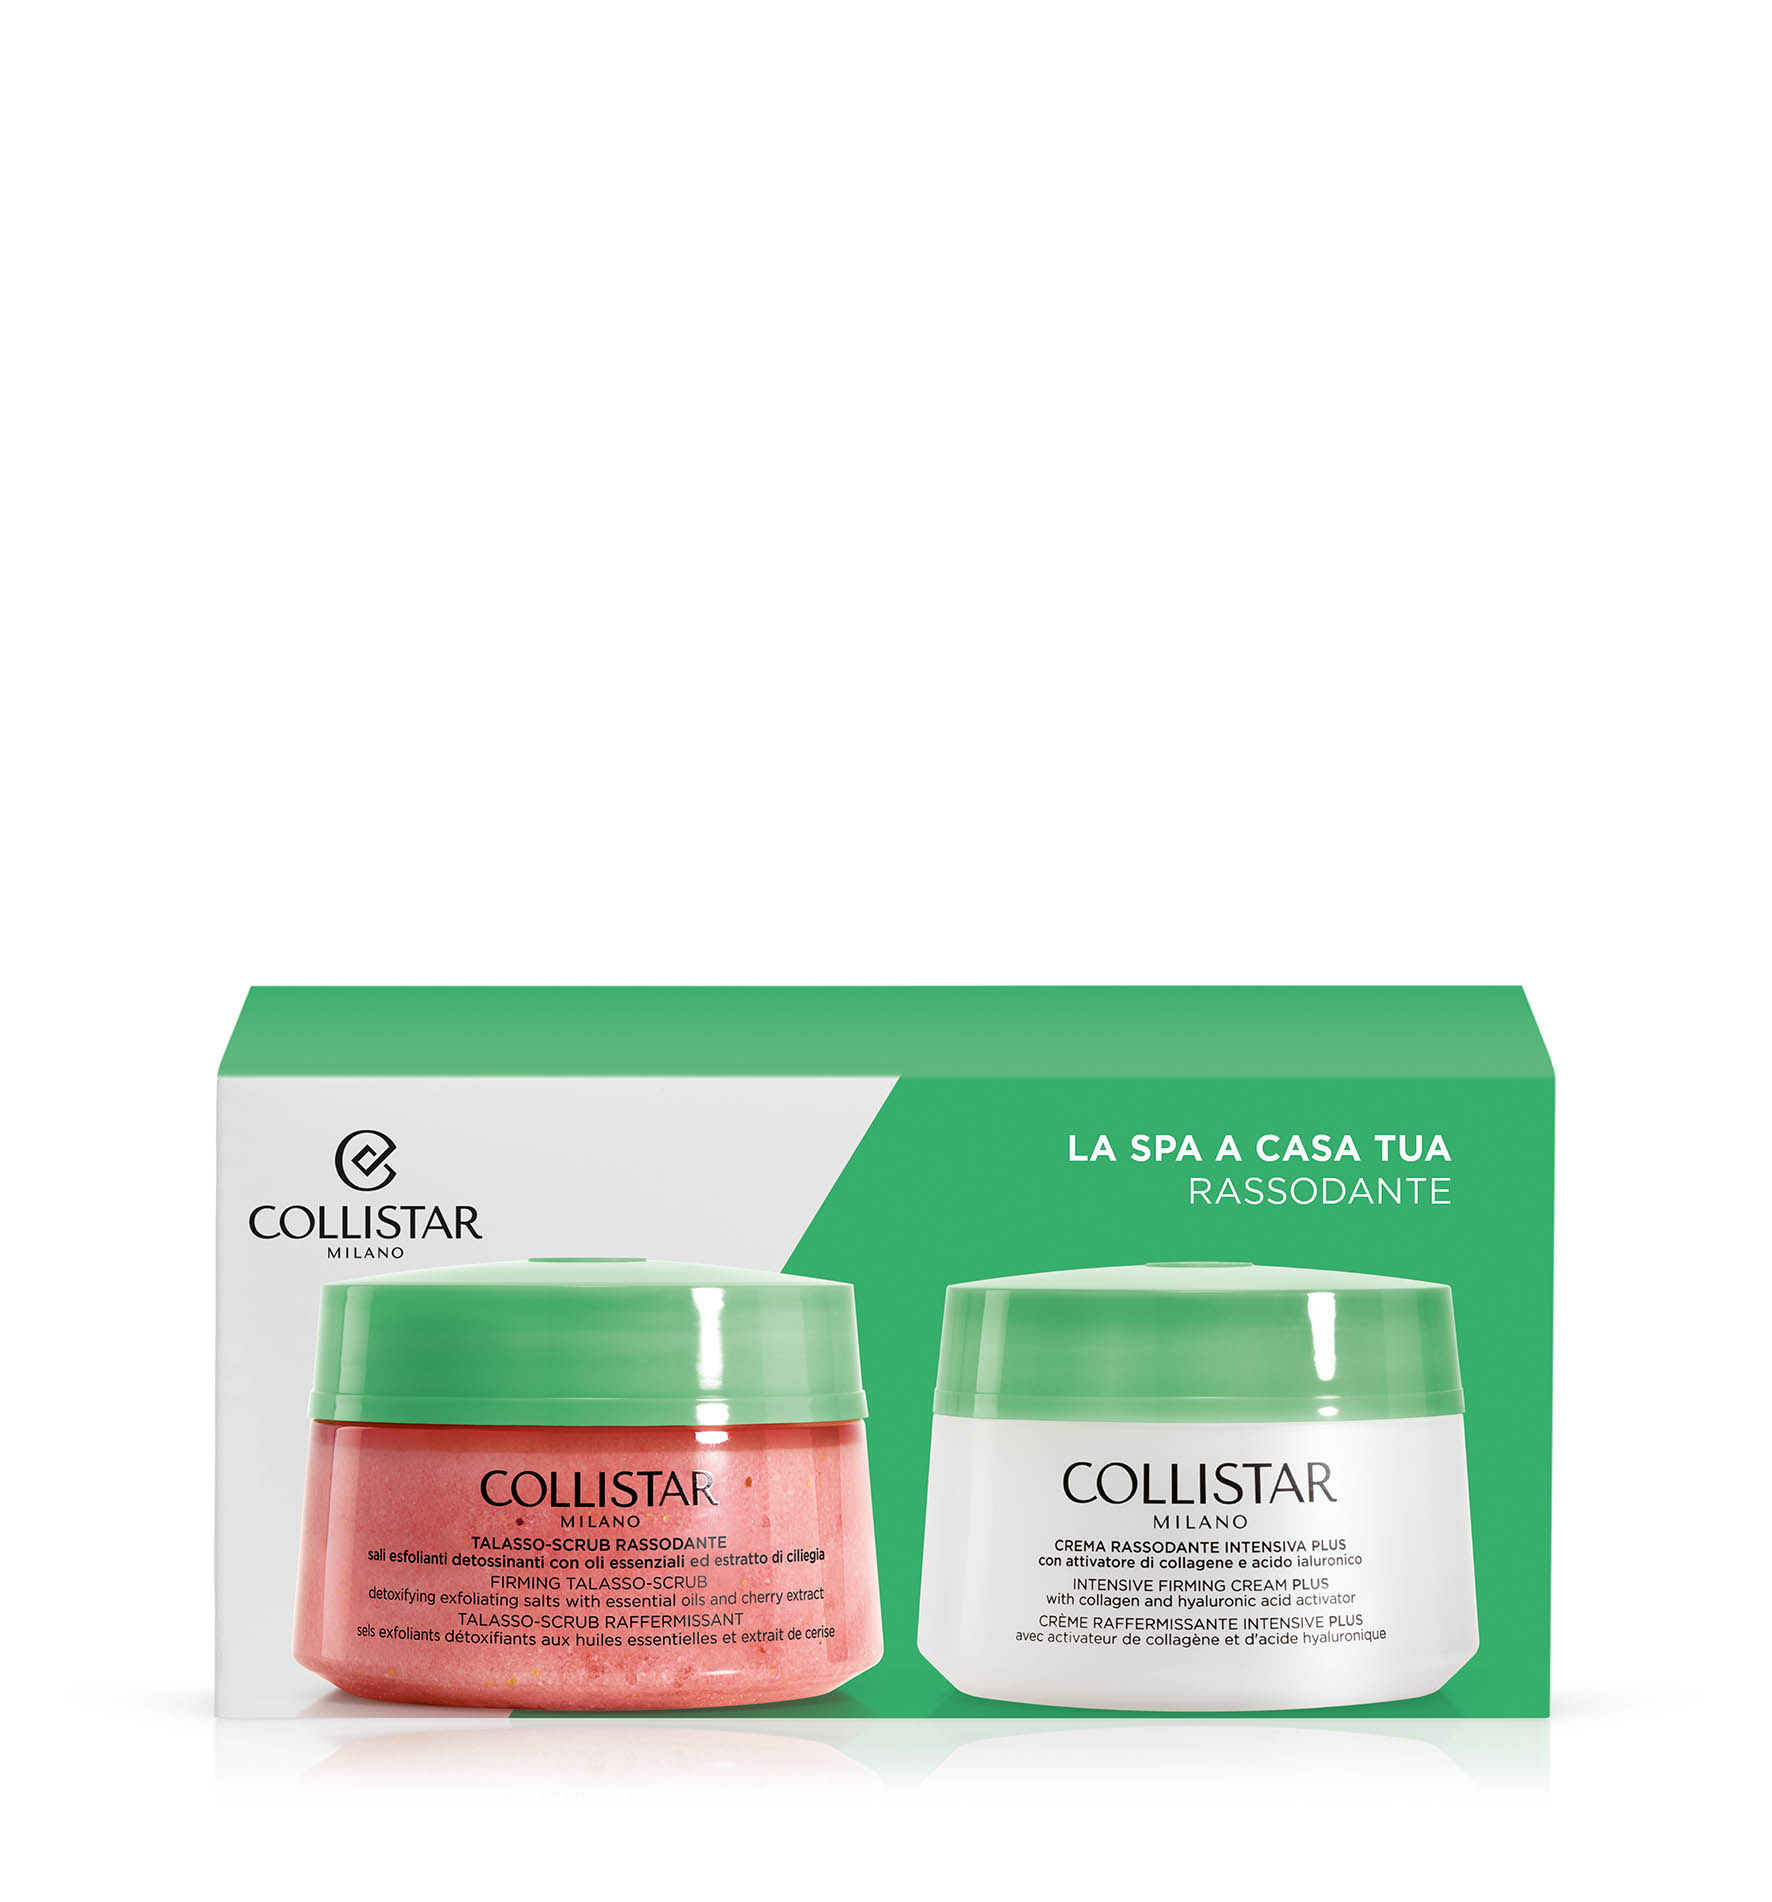 BODYCARE SET SPA AT YOUR HOME - VERSTEVIGENDE BODYCARE ROUTINE - Giftsets | Collistar - Shop Online Ufficiale